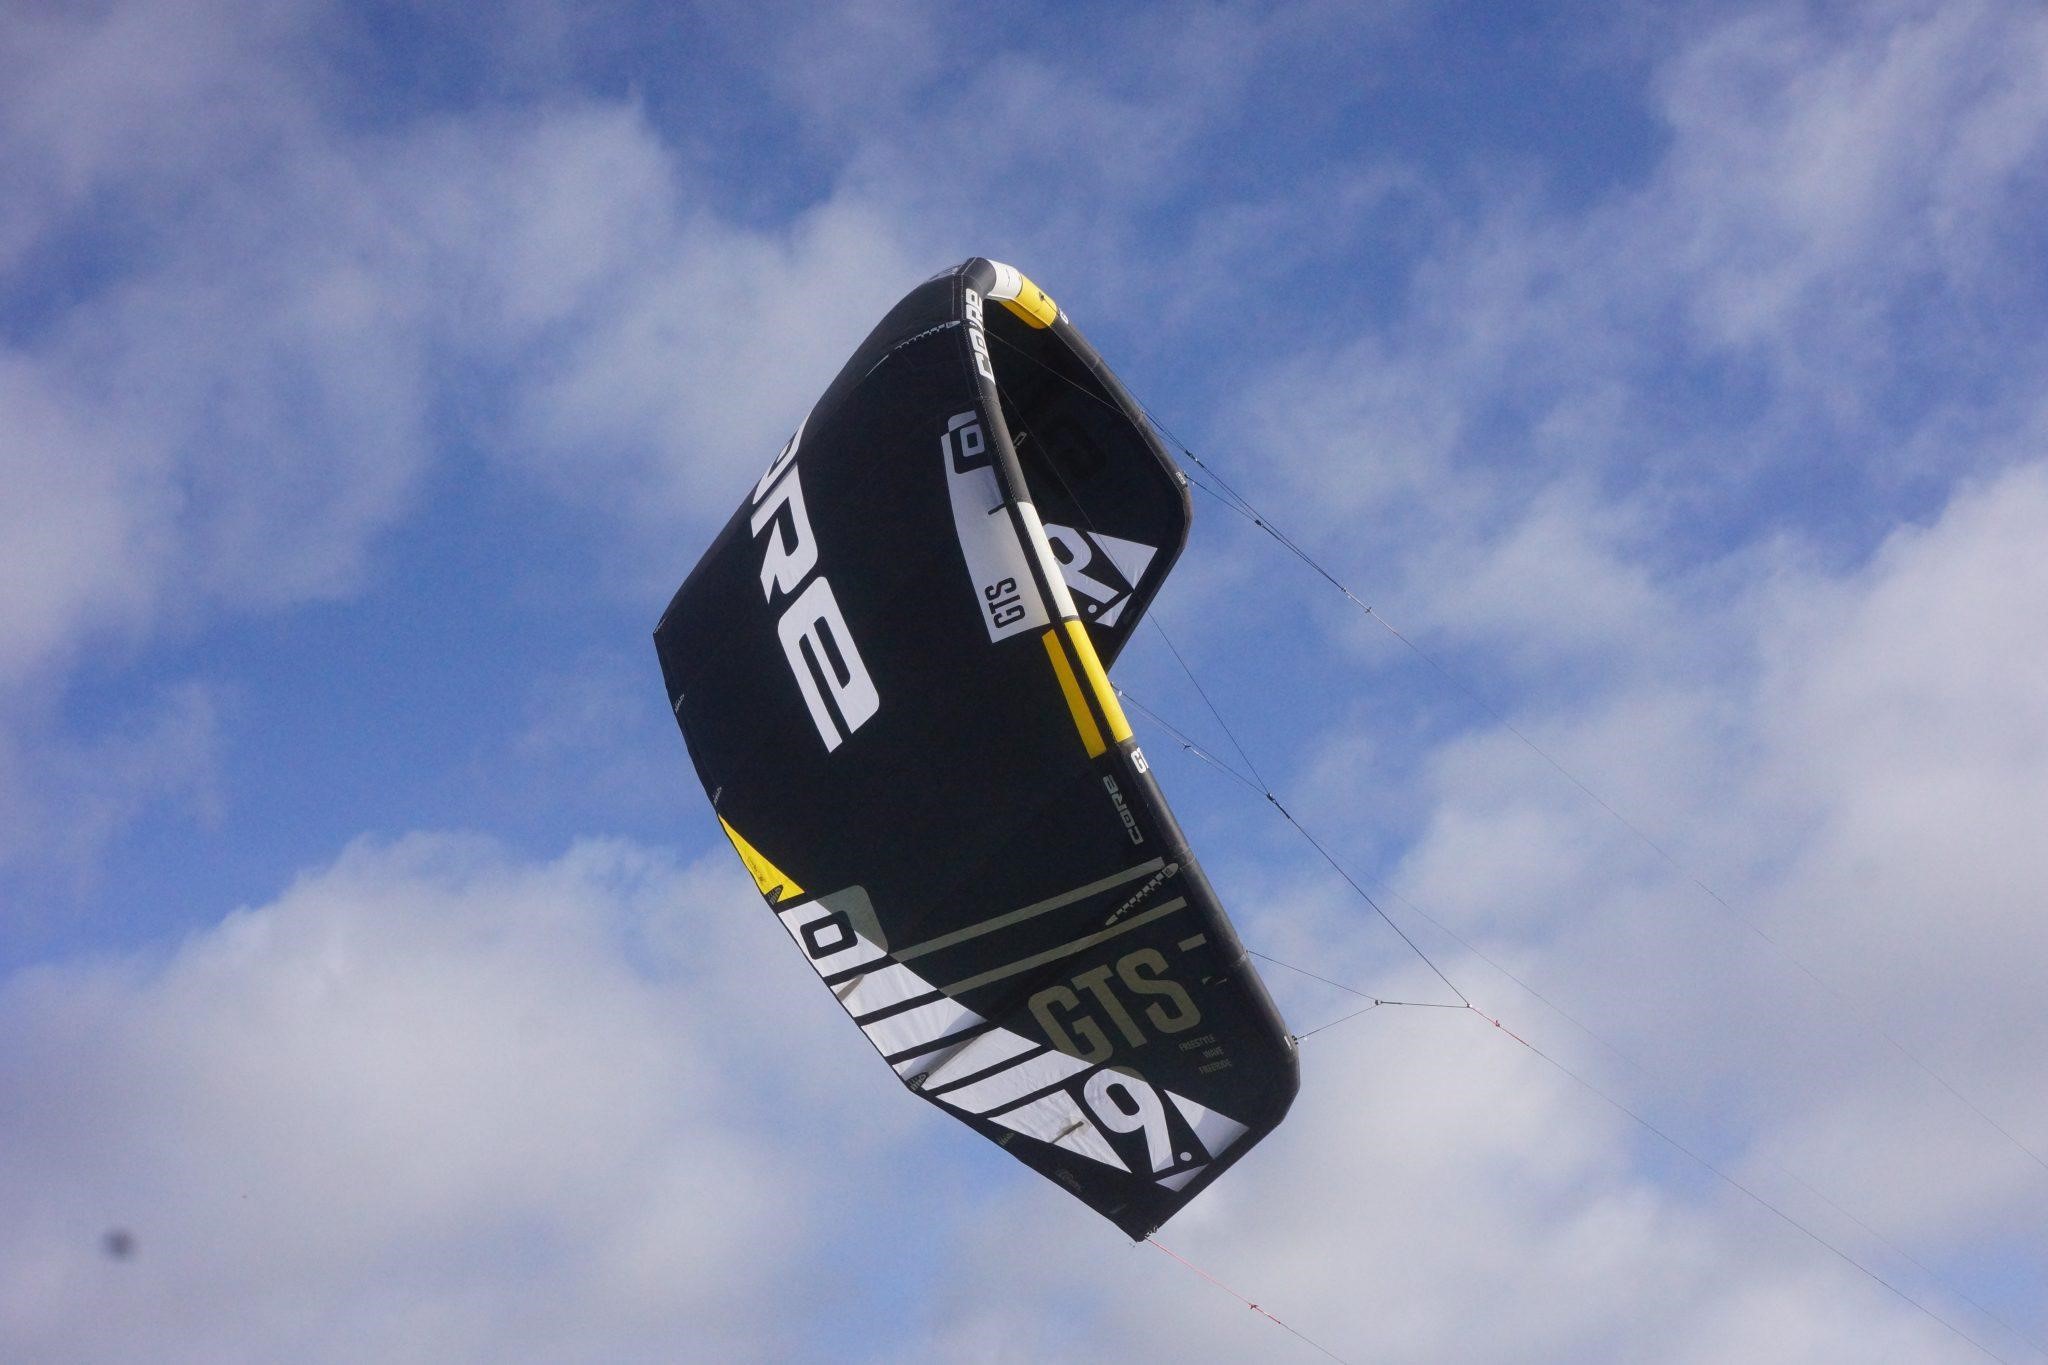 How to Purchase Core Kites For Sale